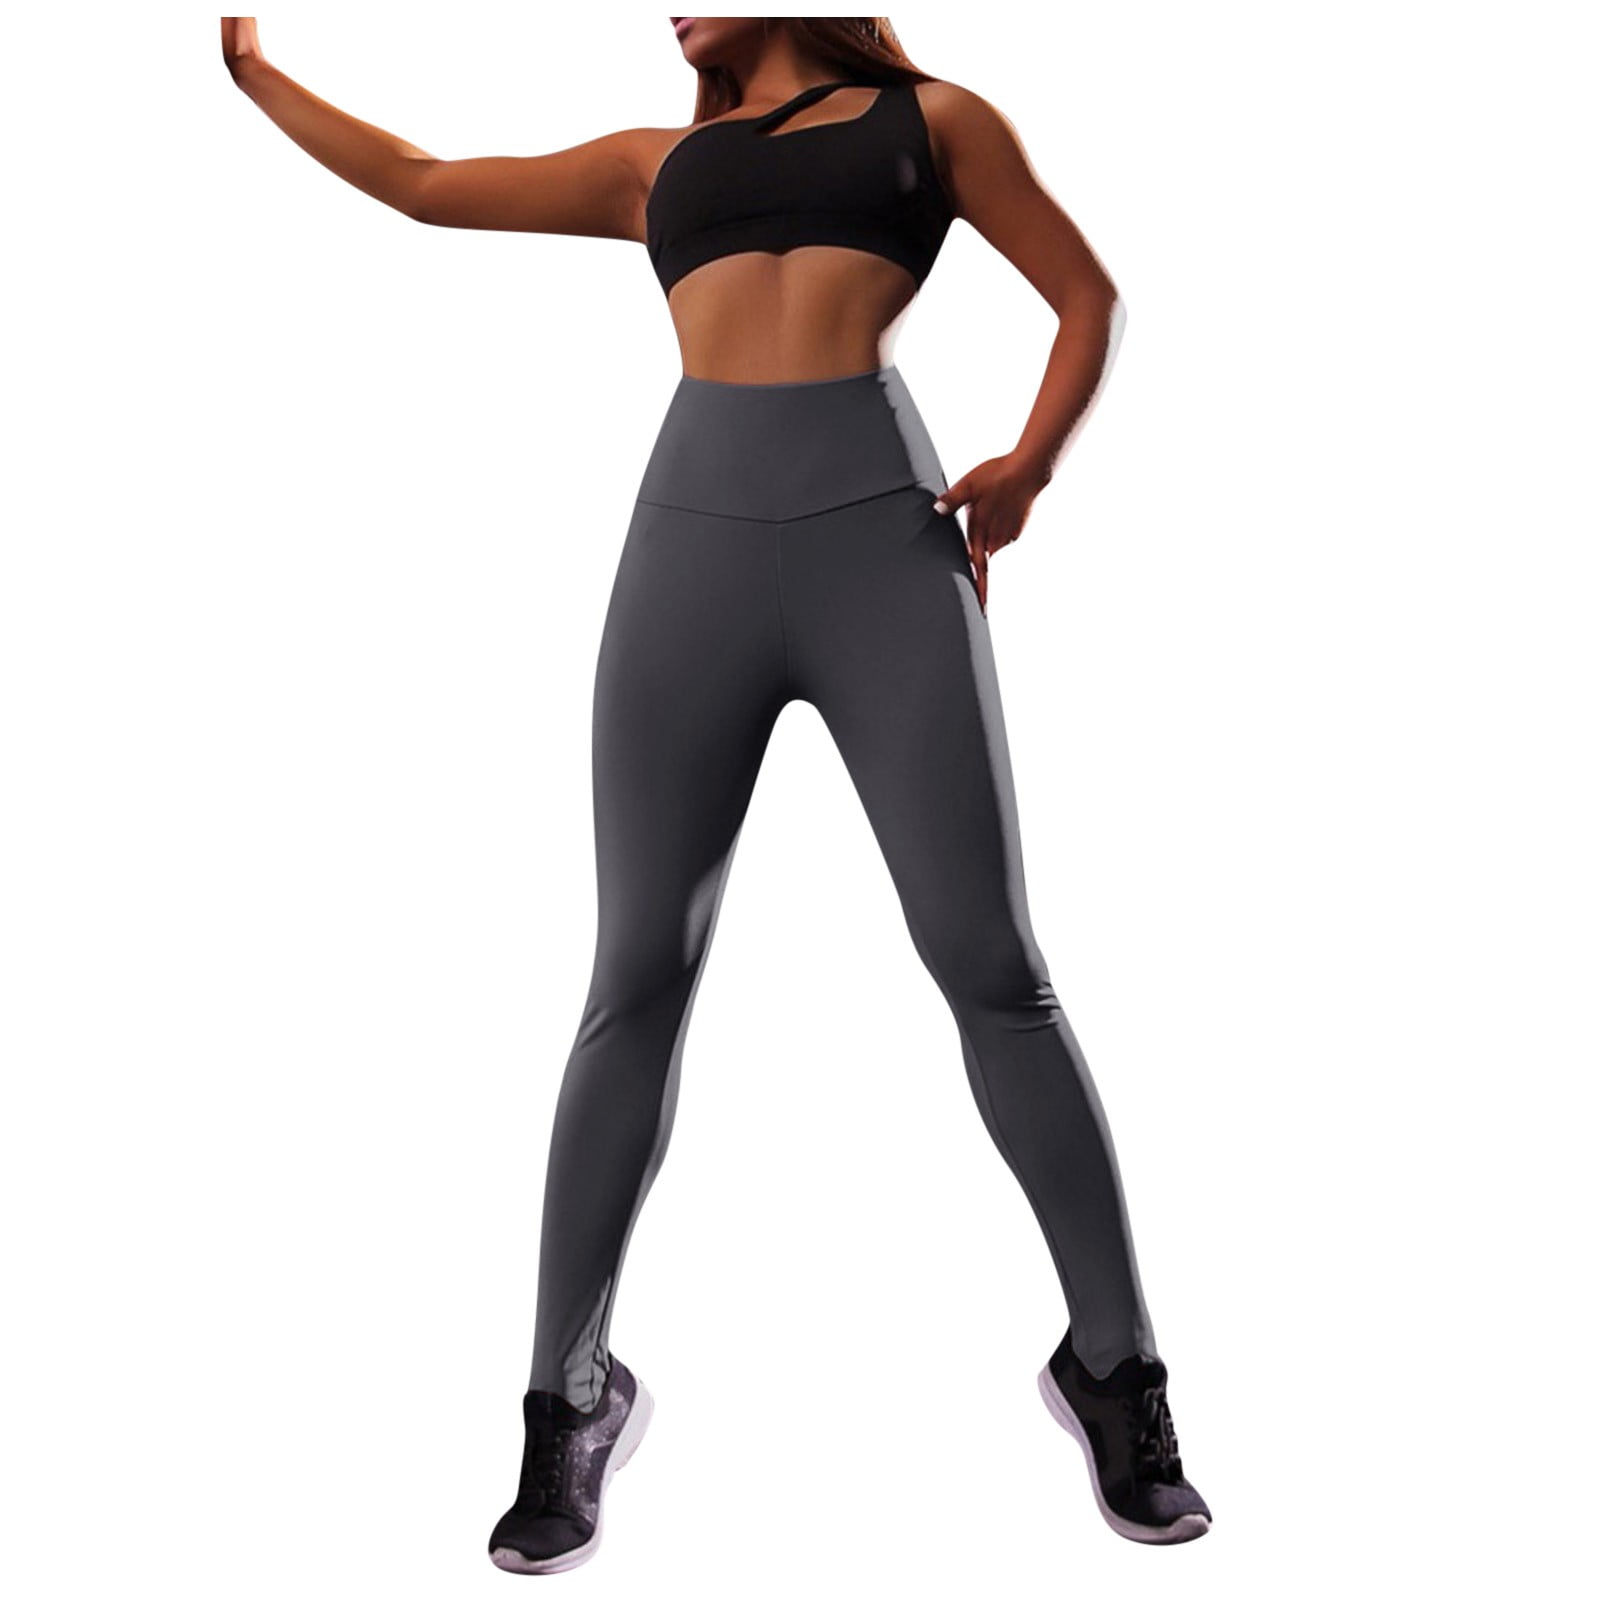 SHAPERX Stretchable Track Pant, Gym Wear Yoga Exercise Walk Jogging Workout  Active Sports Fitness or Everyday Slim Fit Leggings for Women Free Size